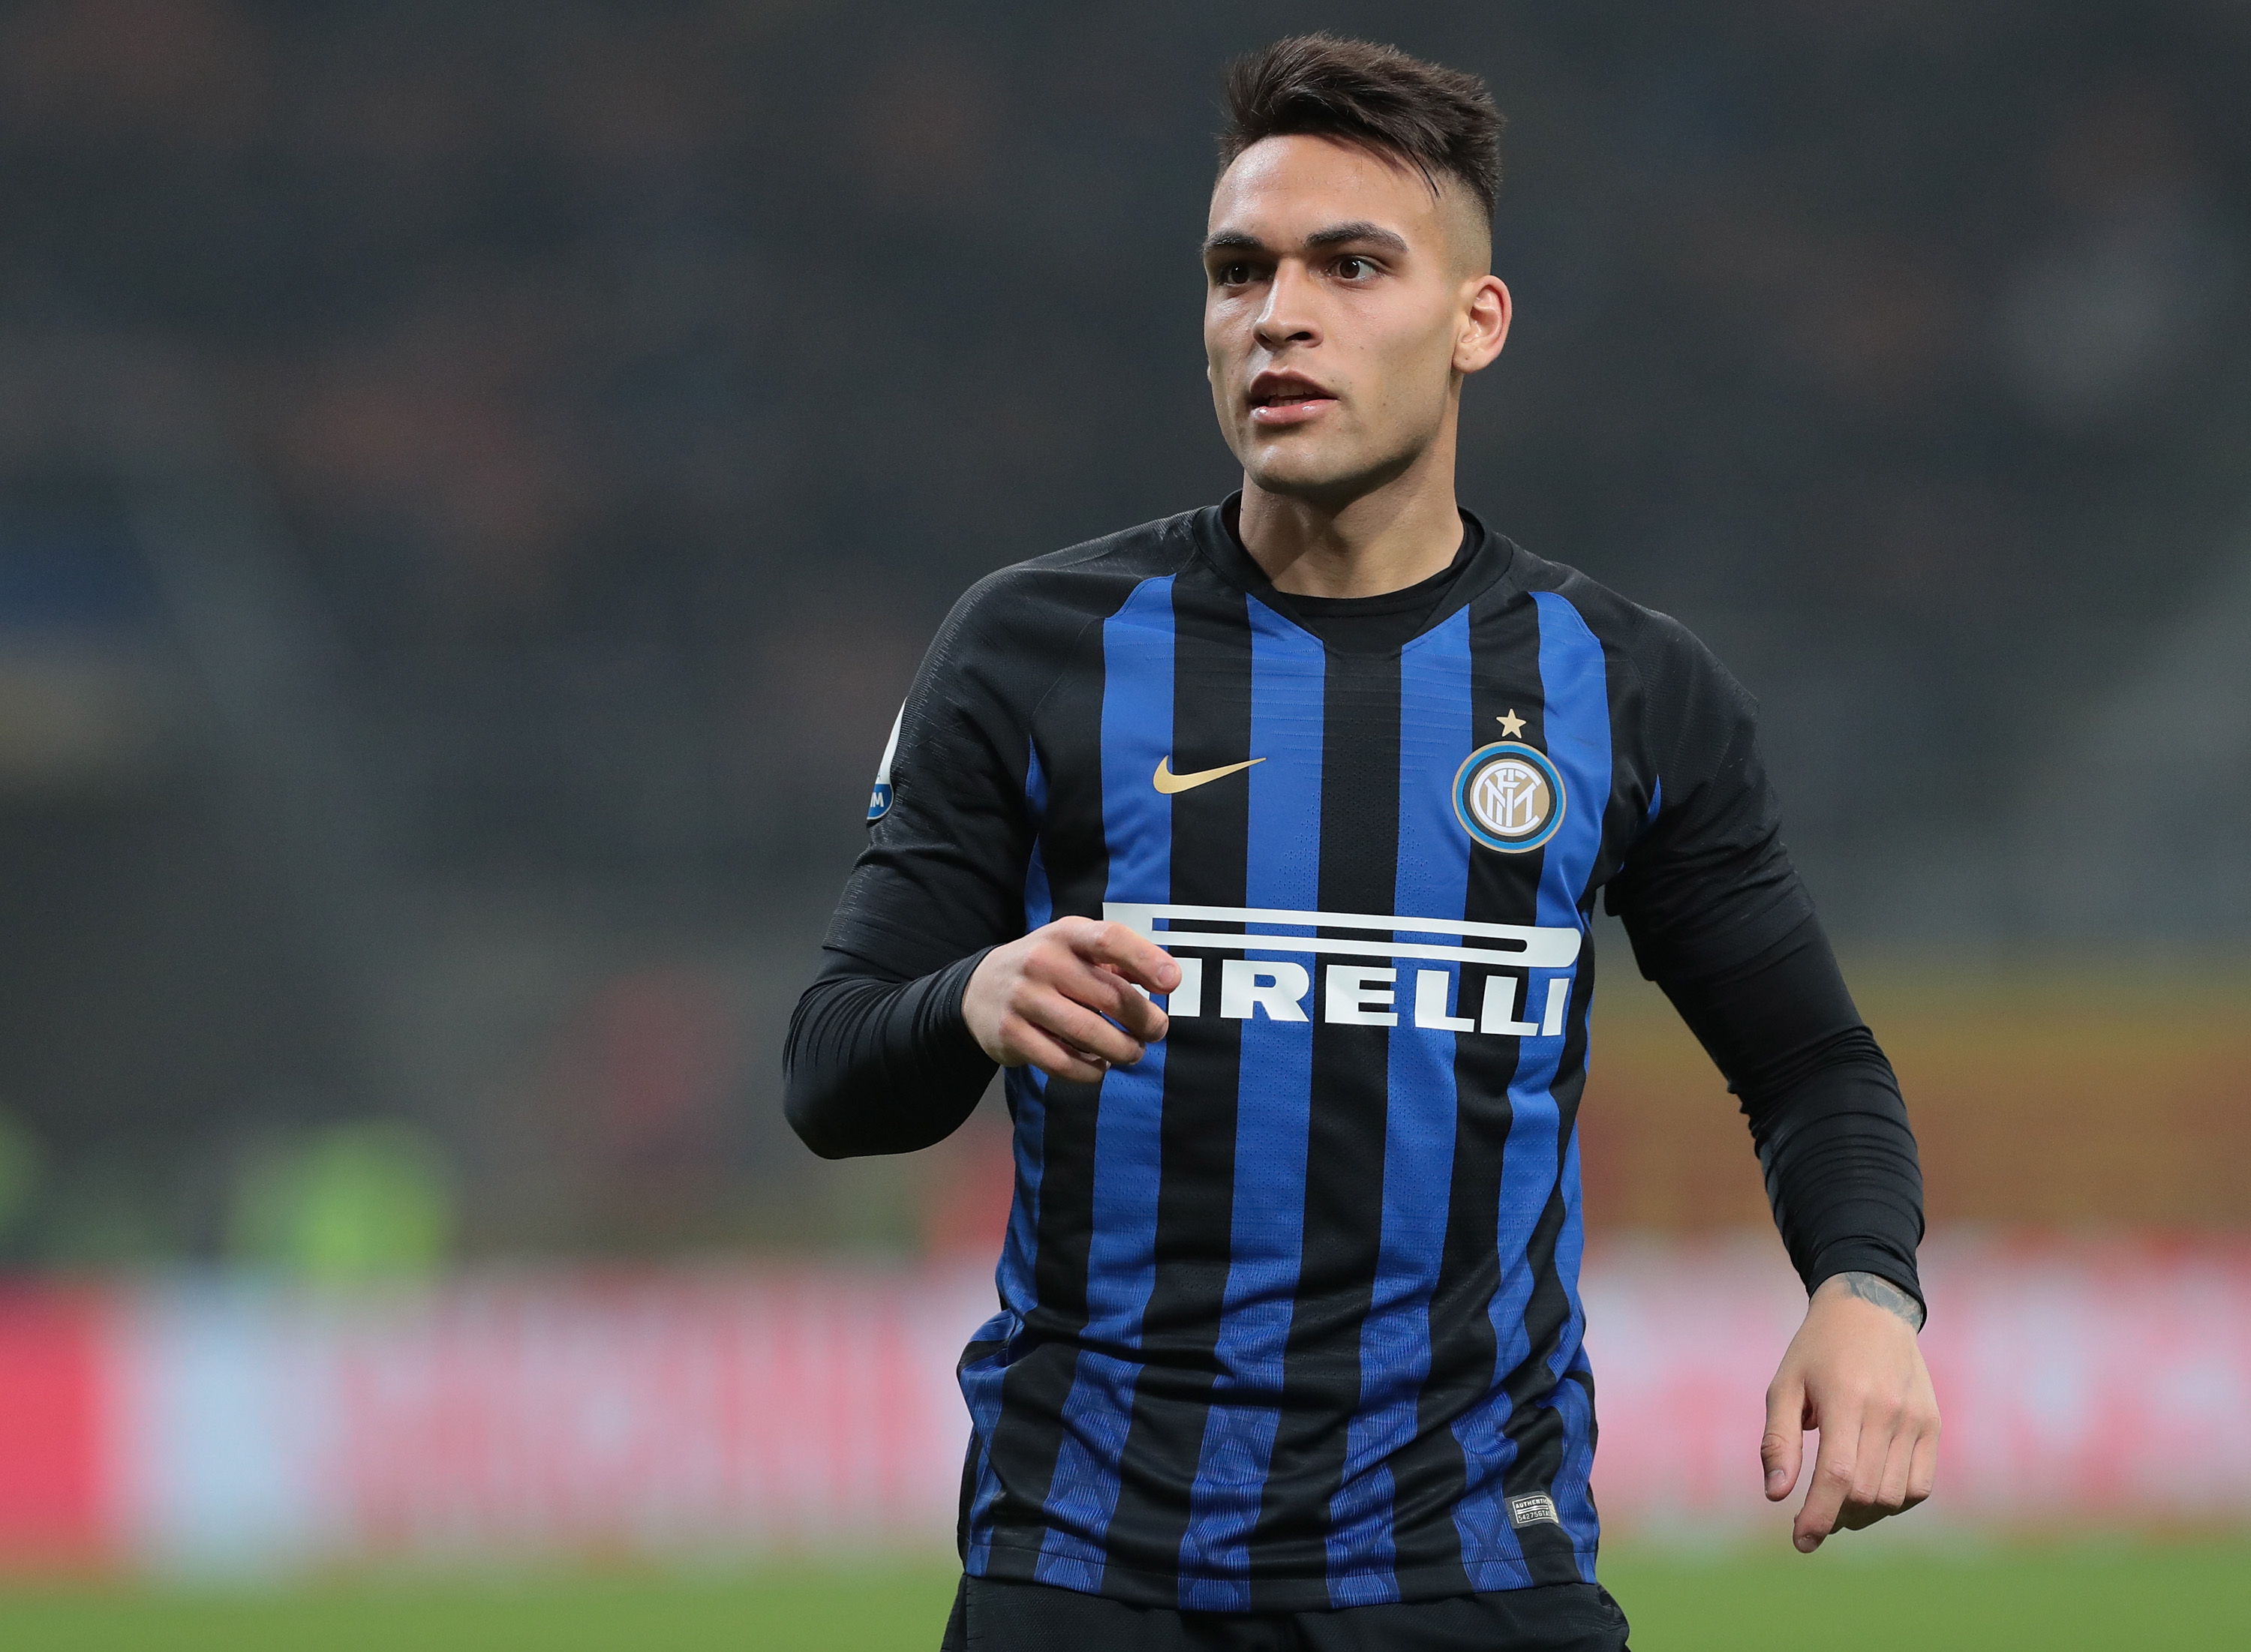 MILAN, ITALY - FEBRUARY 17: Lautaro Martinez of FC Internazionale looks on during the Serie A match between FC Internazionale and UC Sampdoria at Stadio Giuseppe Meazza on February 17, 2019 in Milan, Italy. (Photo by Emilio Andreoli/Getty Images)